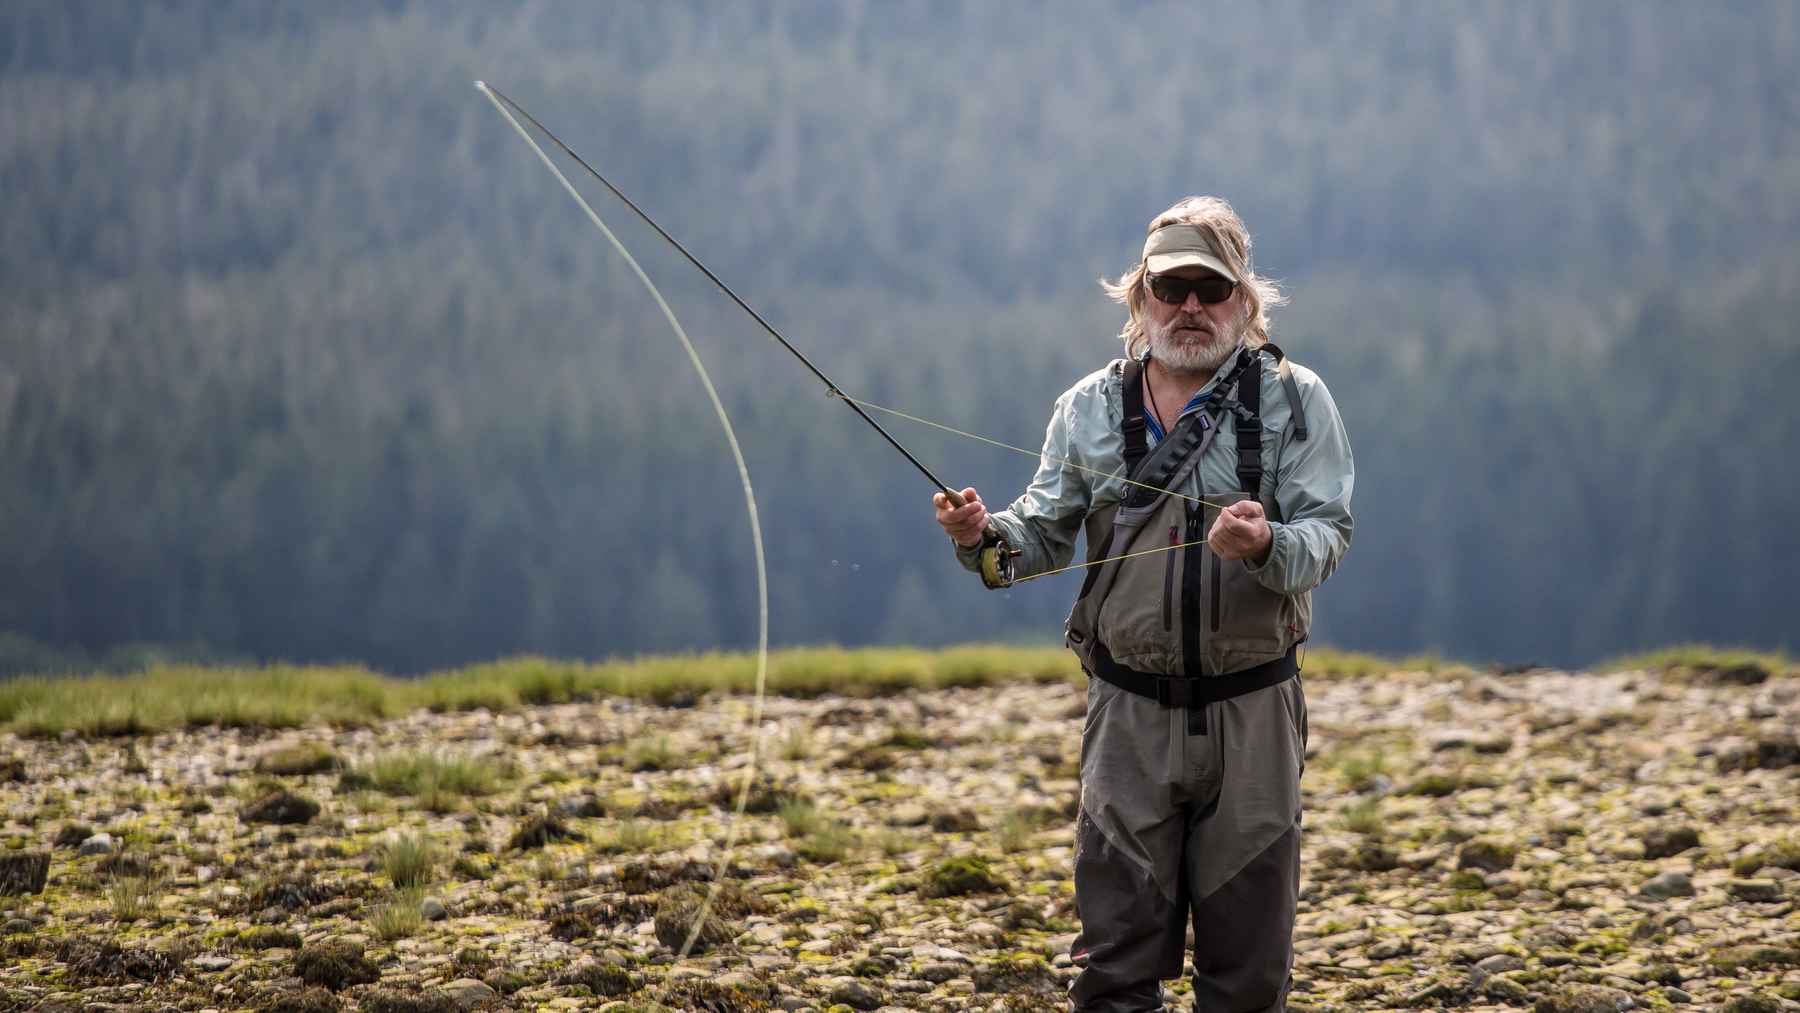 Fly Fishing Rods: Browse Industry Leading Fly Rods